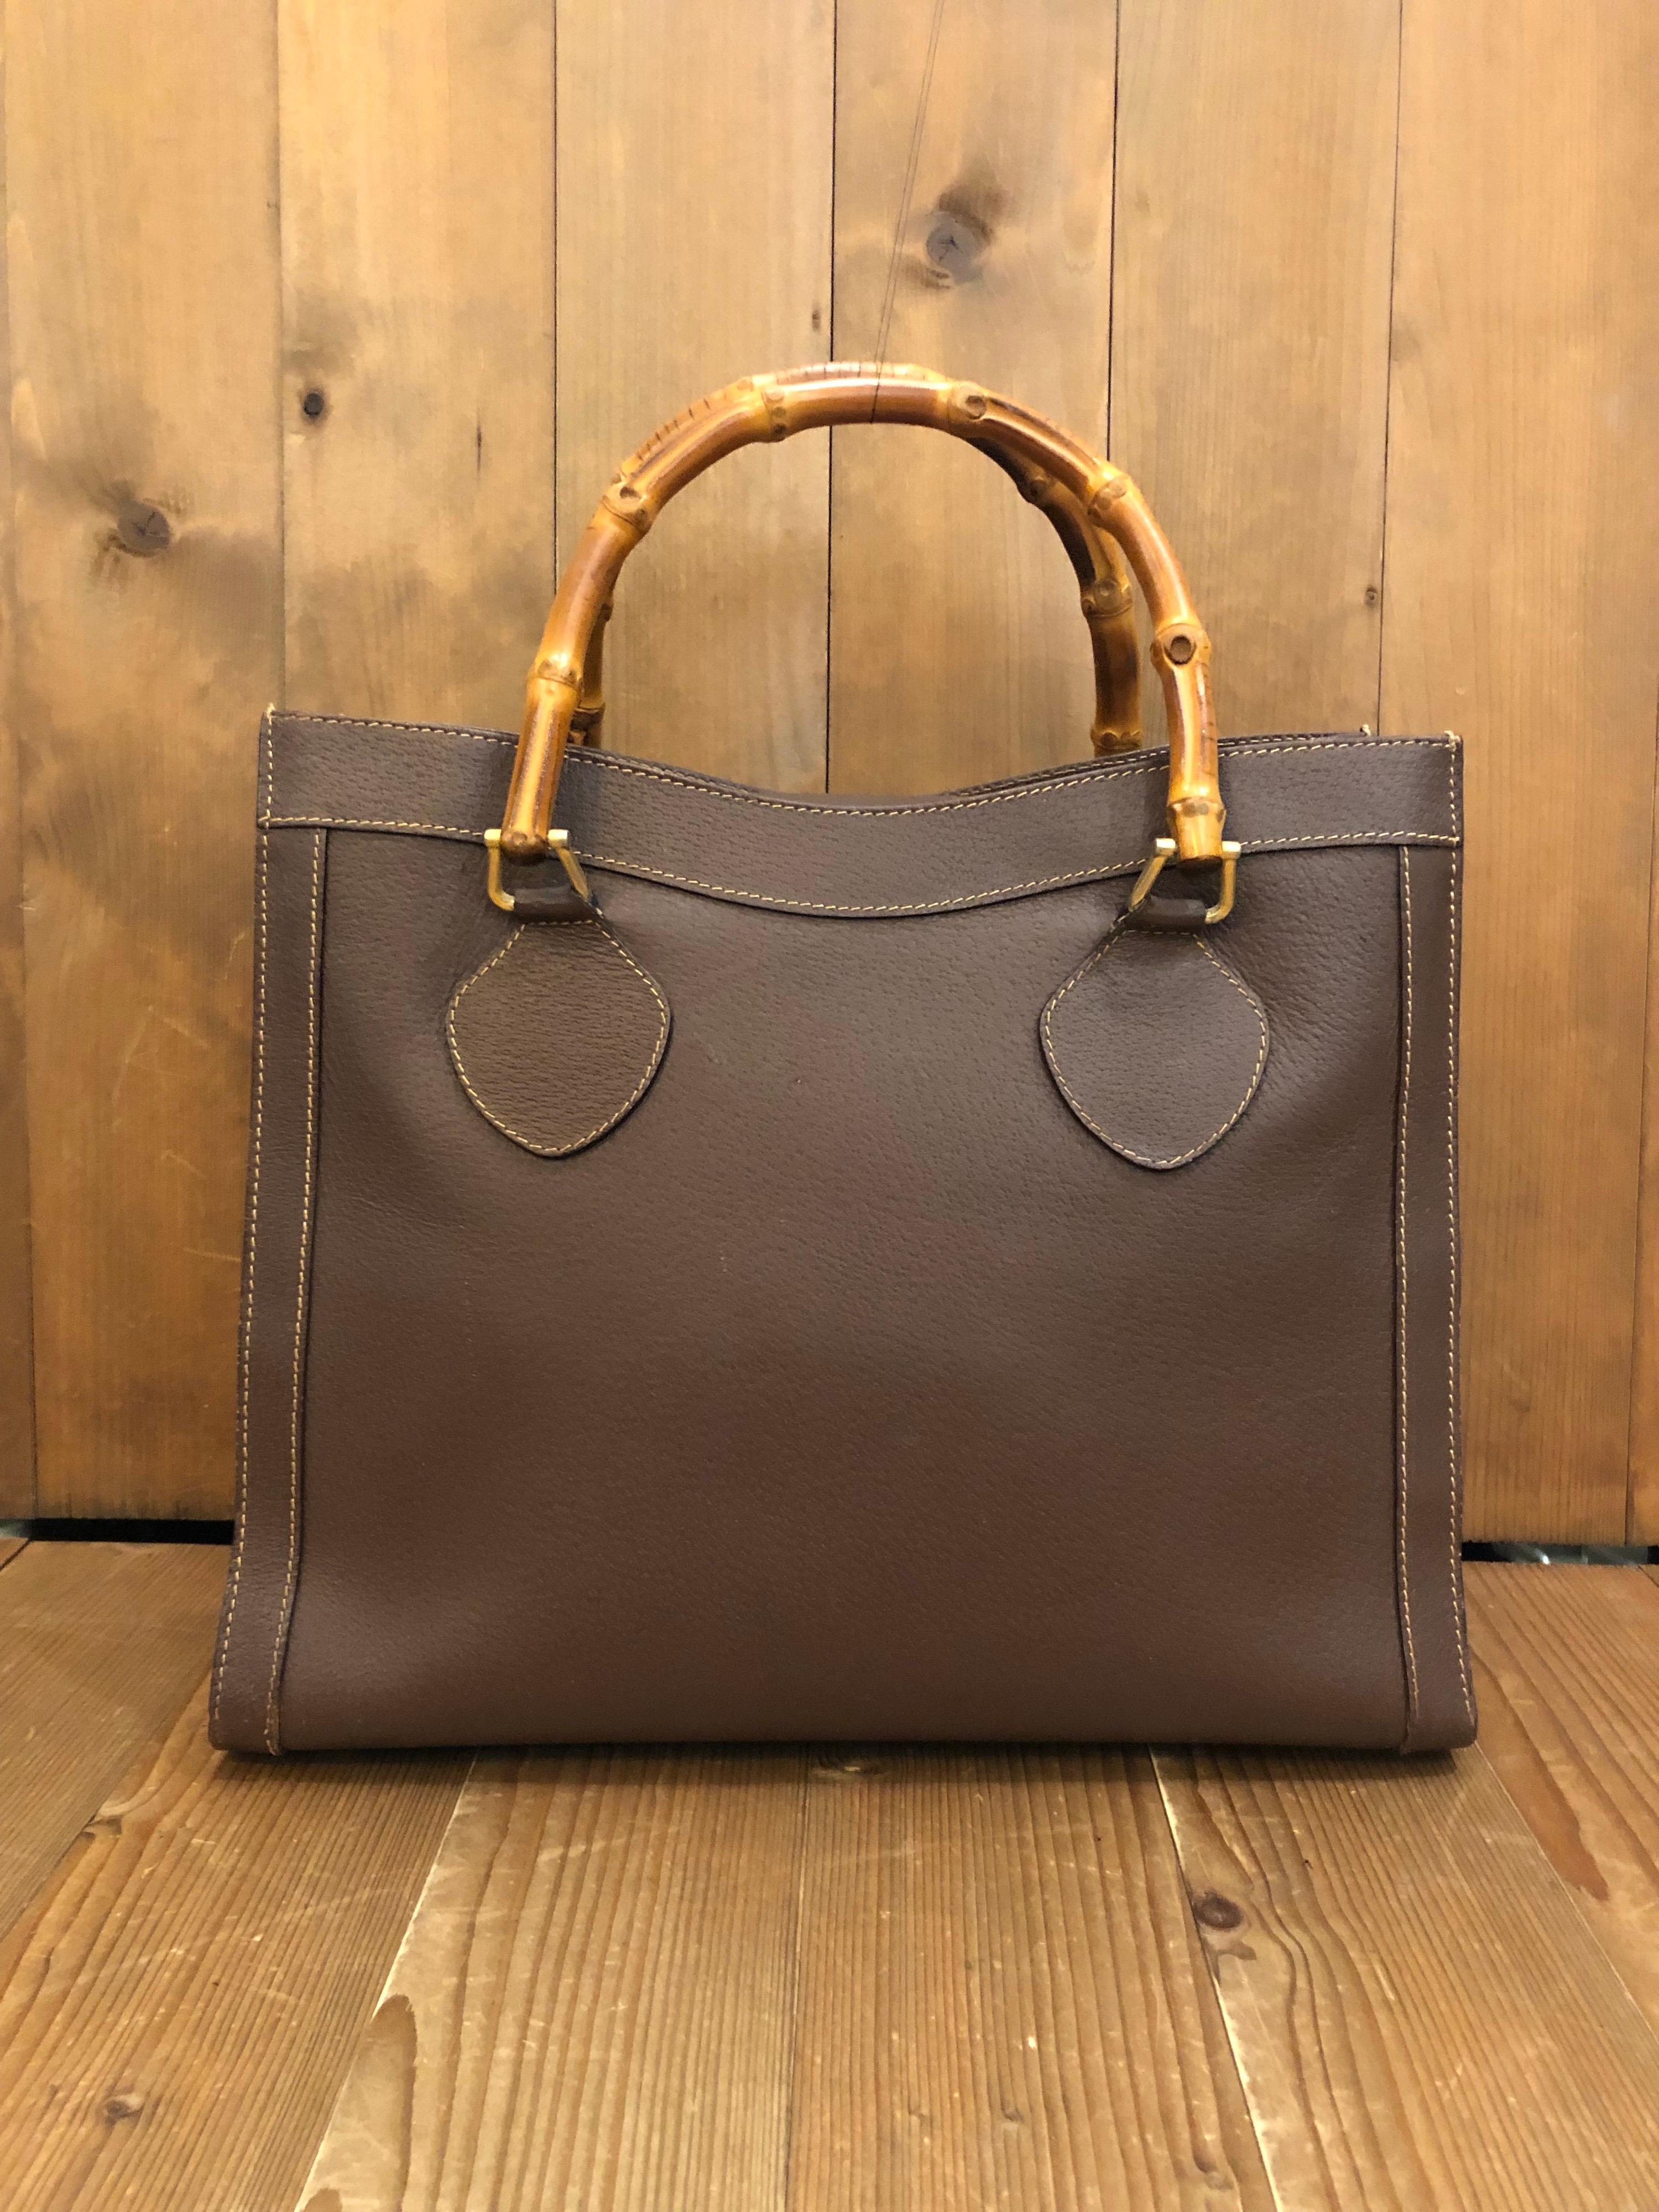 1990s GUCCI bamboo tote in chocolate brown leather. The Bamboo tote is one of Princess Diana's favorite purses. Gucci revamped this Bamboo tote in 2021 winter collection. Made in Italy. Measures 13 x 11 x 5.5 inches handle drop 5 inches. It features